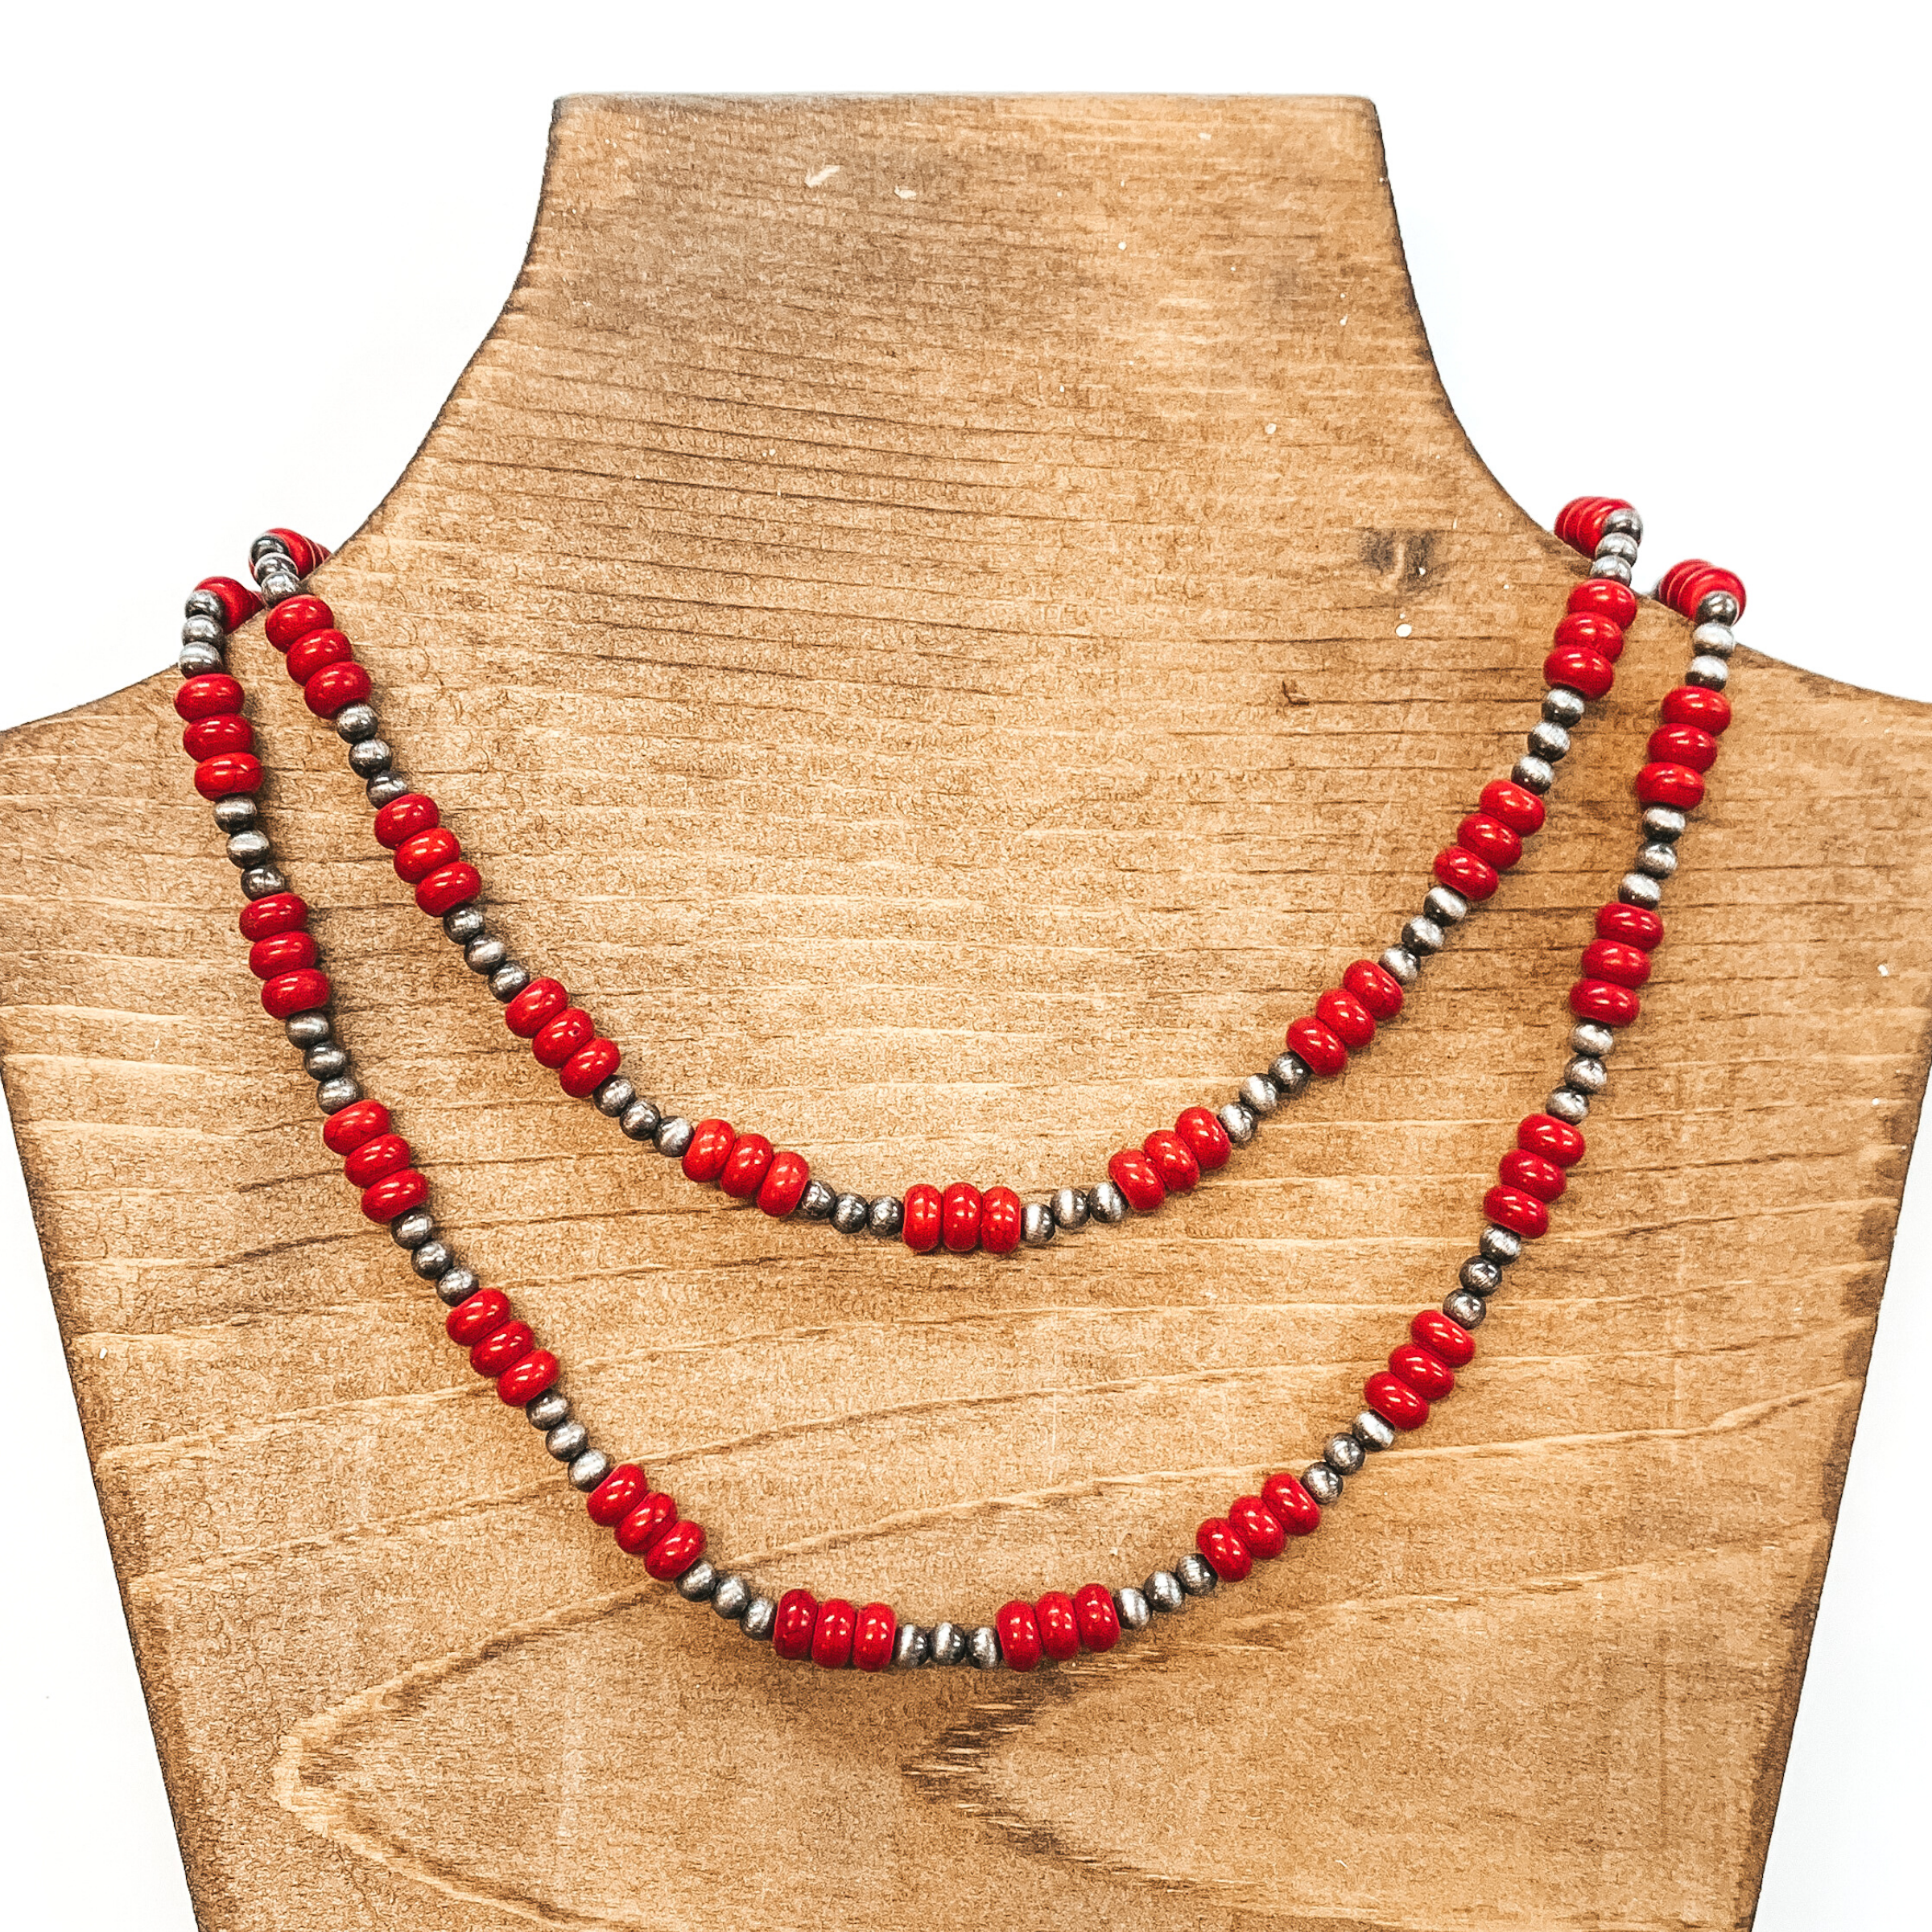 Two strand necklace that includes silver bead segments with bigger, red bead segments. This necklace is pictured on a brown necklace holder on a white background.